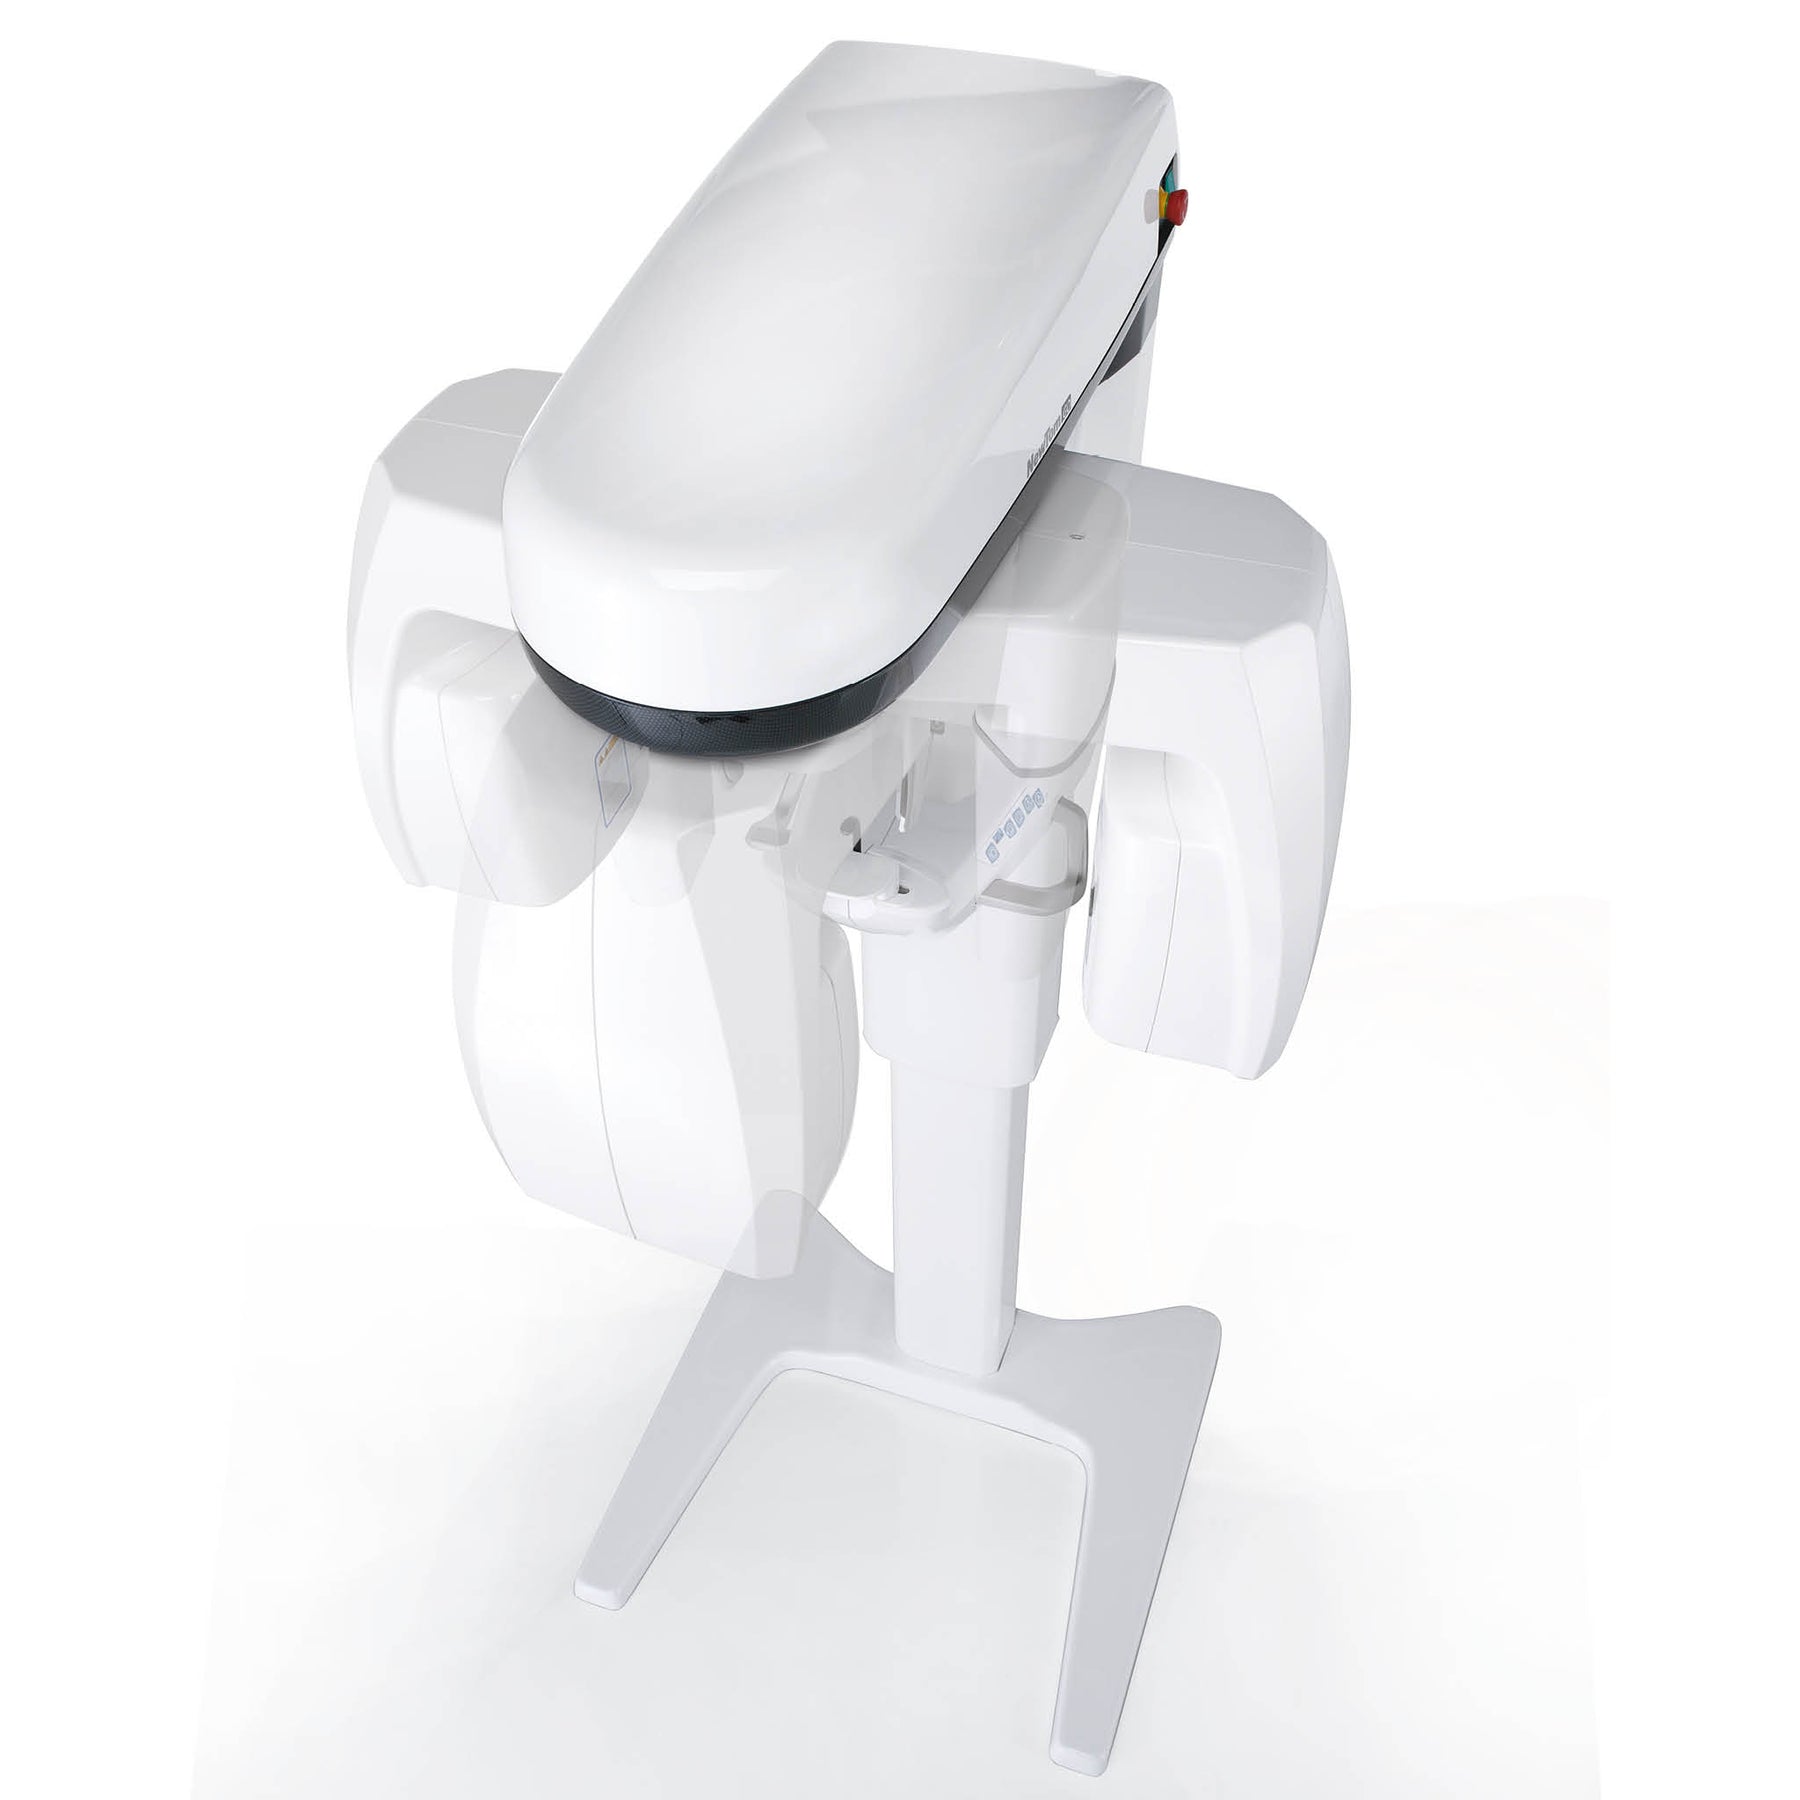 NewTom GO 2D/3D is the smallest OPG/CBCT unit on the market, top view.